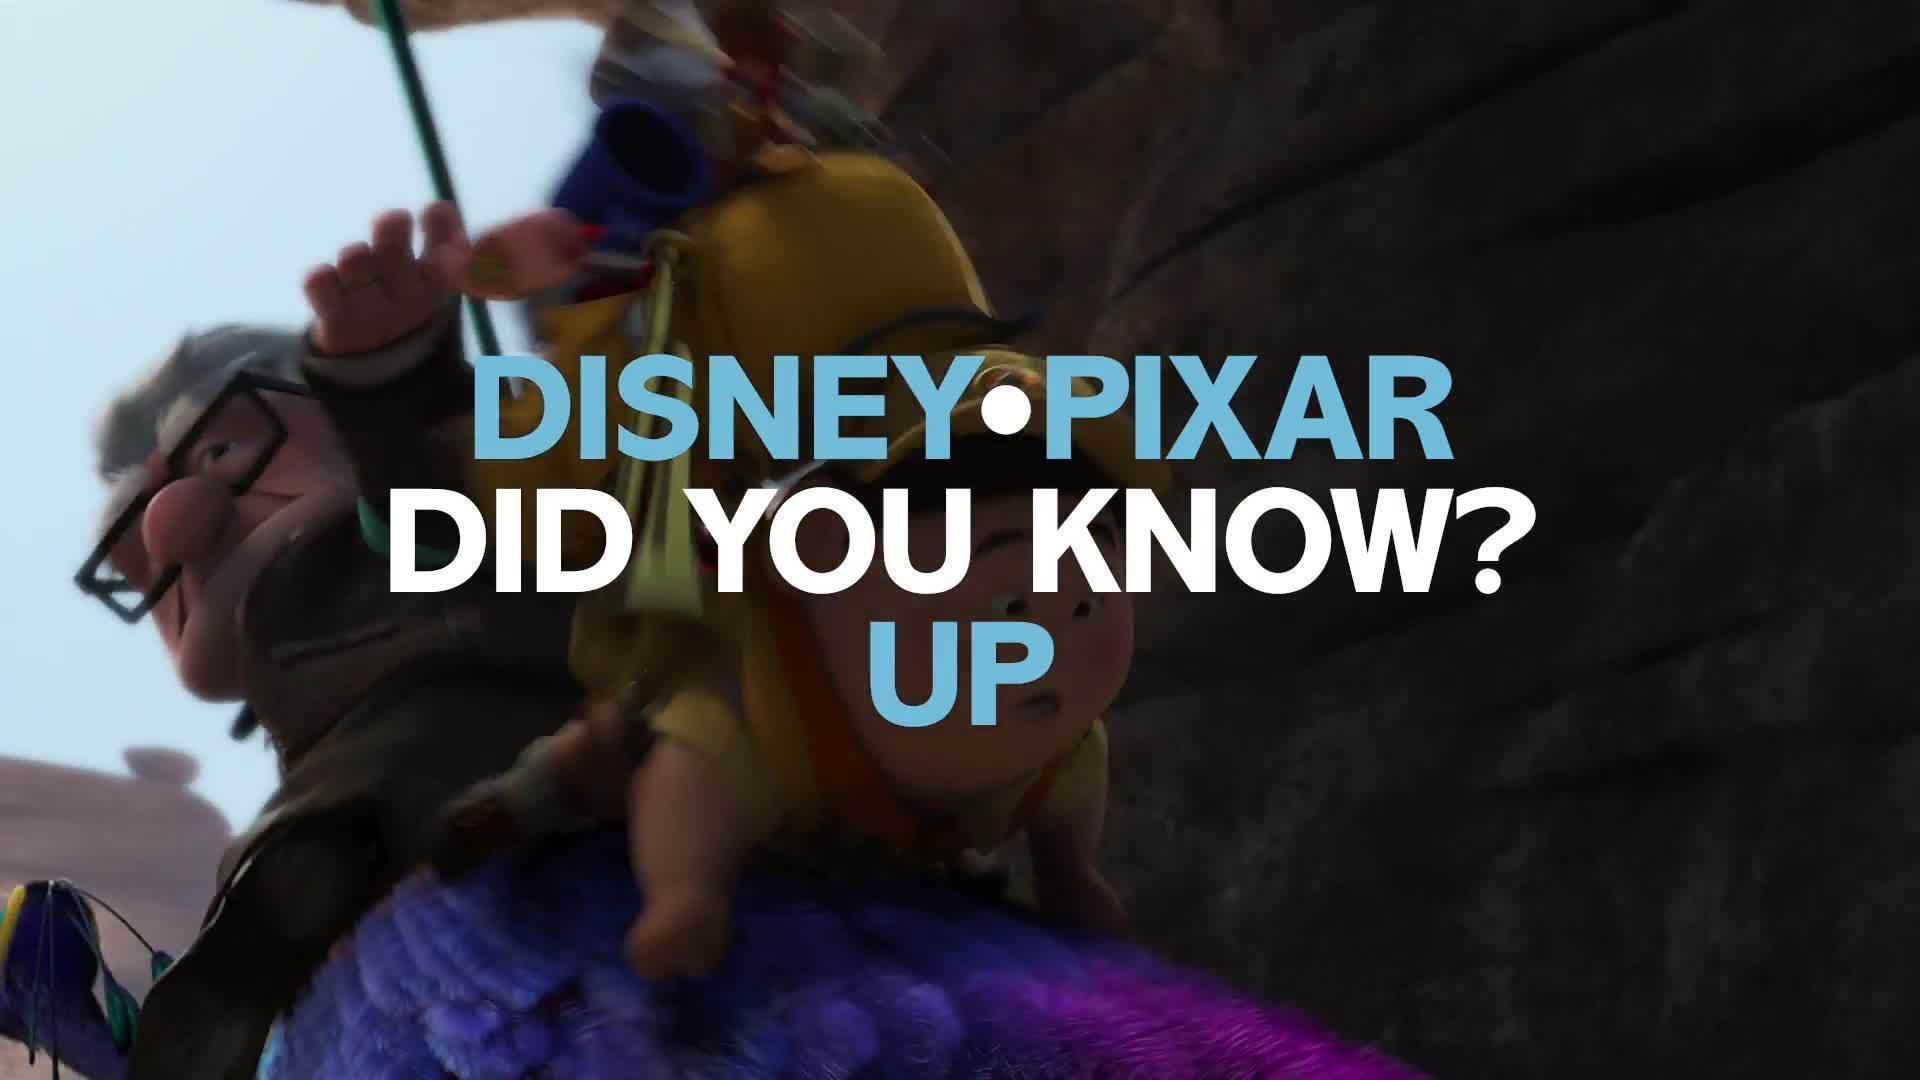 UP Easter Eggs & Fun Facts | Pixar Did You Know? by Disney•Pixar